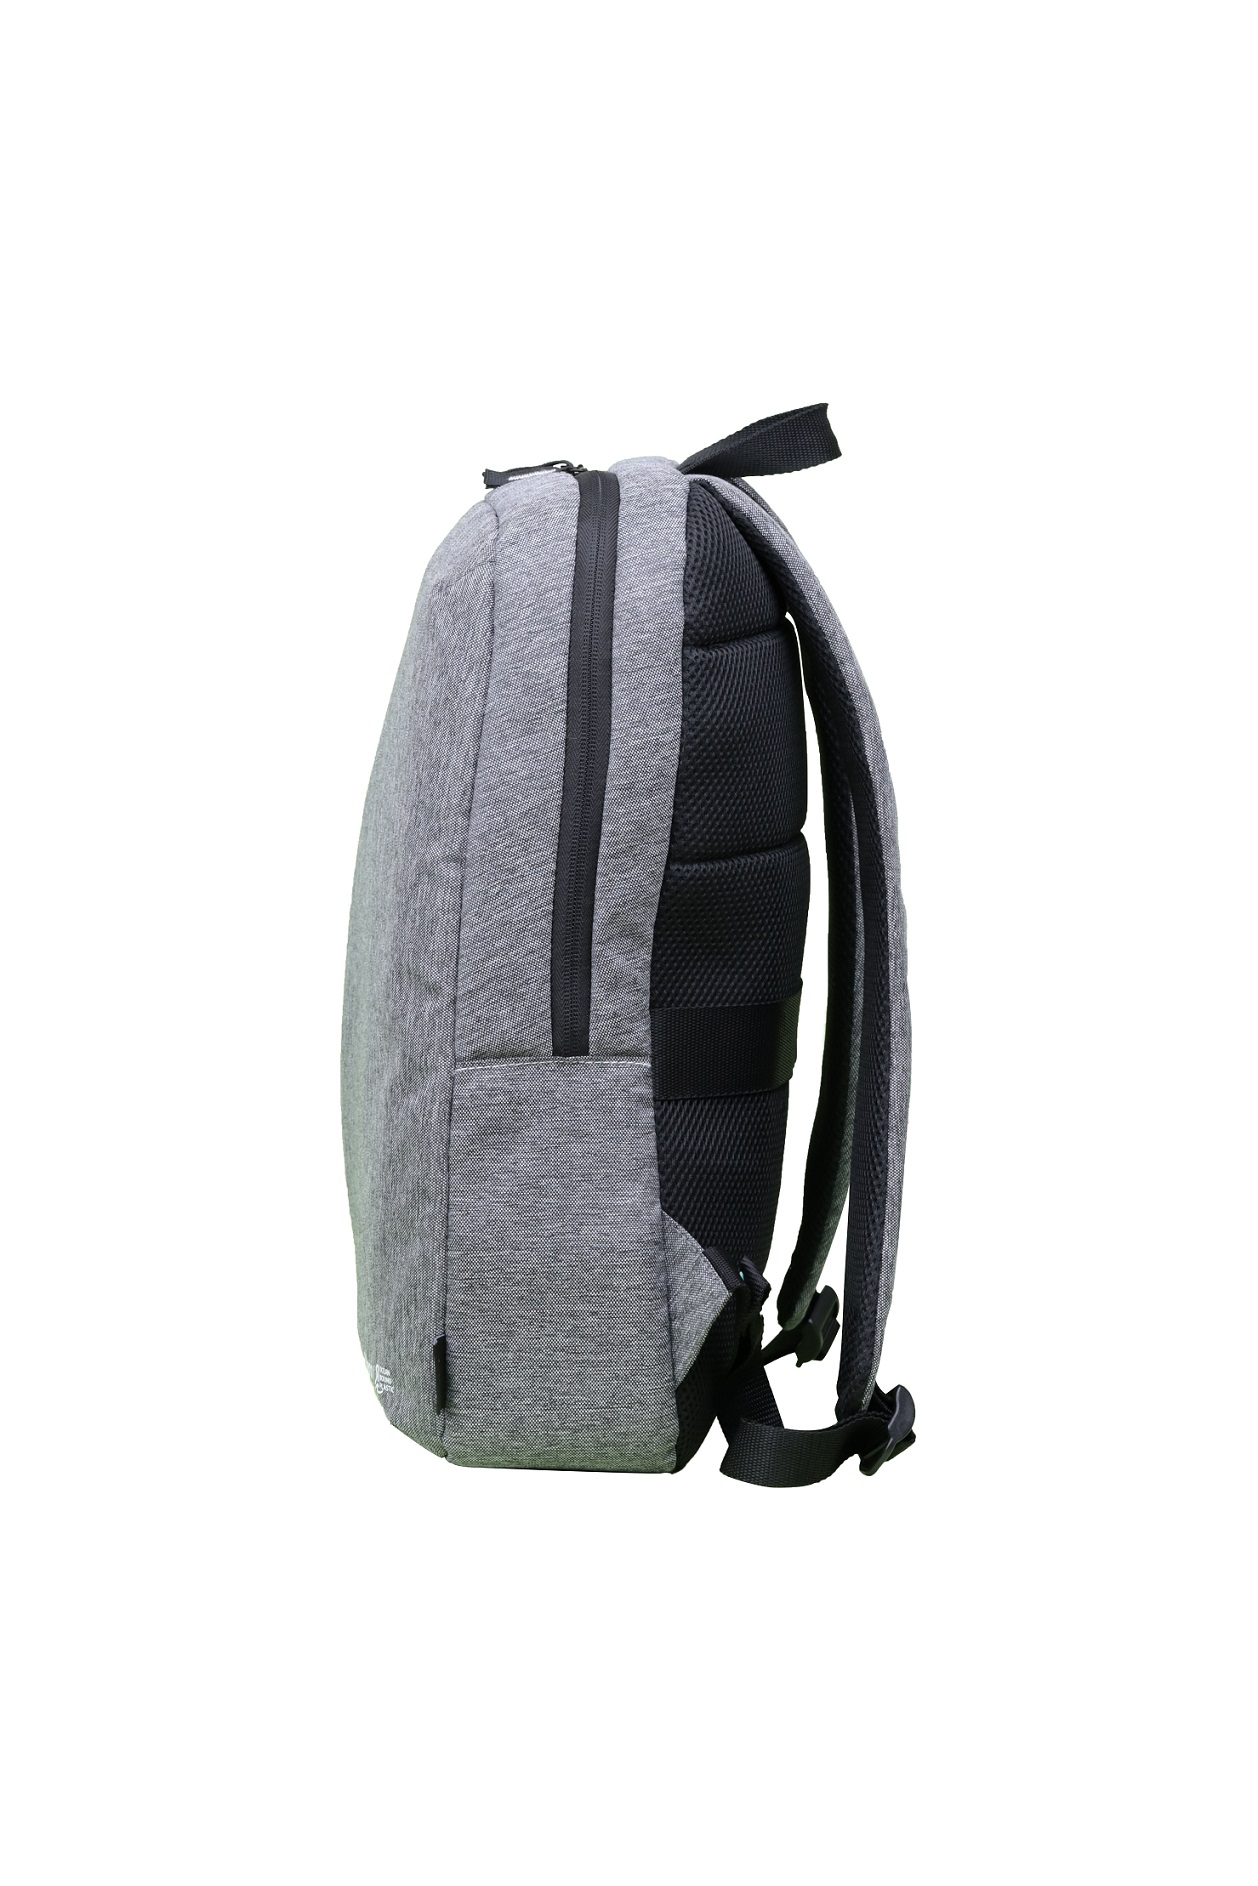 Acer Vero OBP backpack 15.6", retail pack 